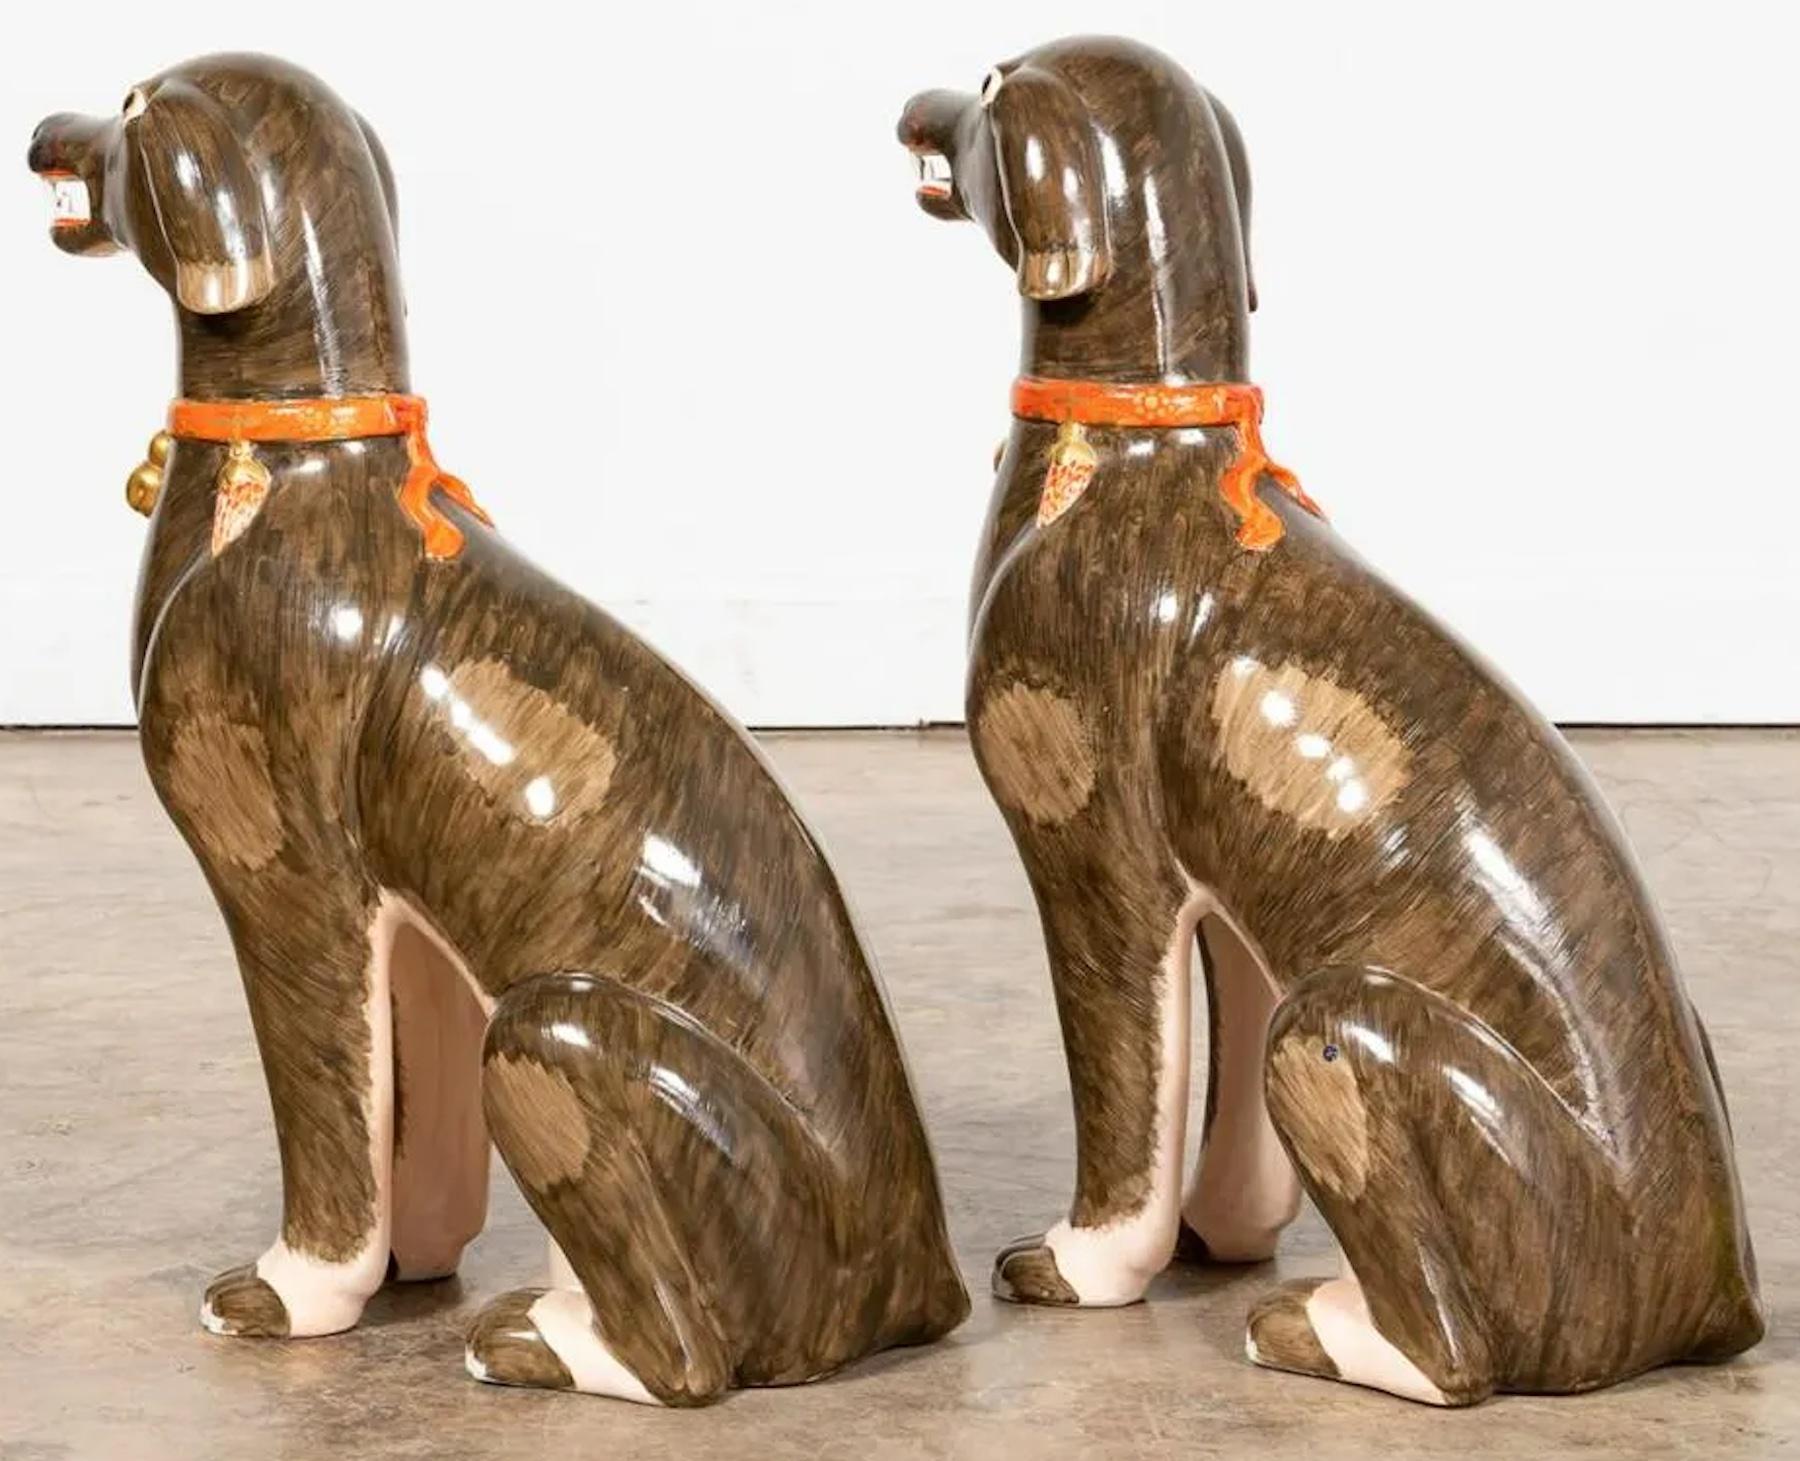 Porcelain Massive Pair of Qianlong Chinese Export Style Sated Dogs, Attib to Mottahedeh